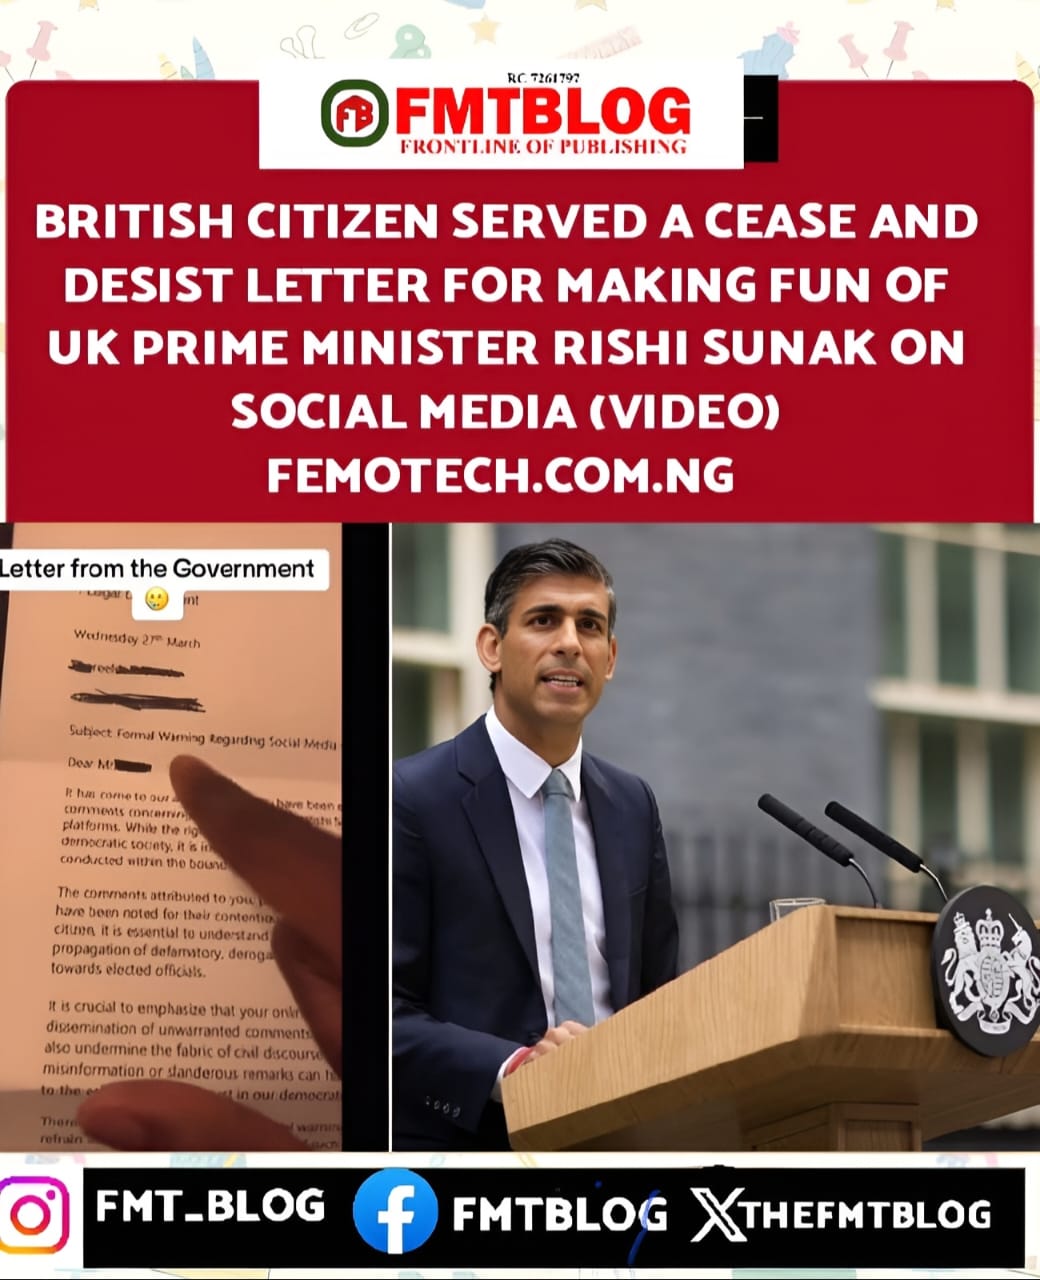 British Citizen Served A Cease-And-Desist Letter For Making Fun Of UK Prime Minister Rishi Sunak On Social Media (VIDEO)